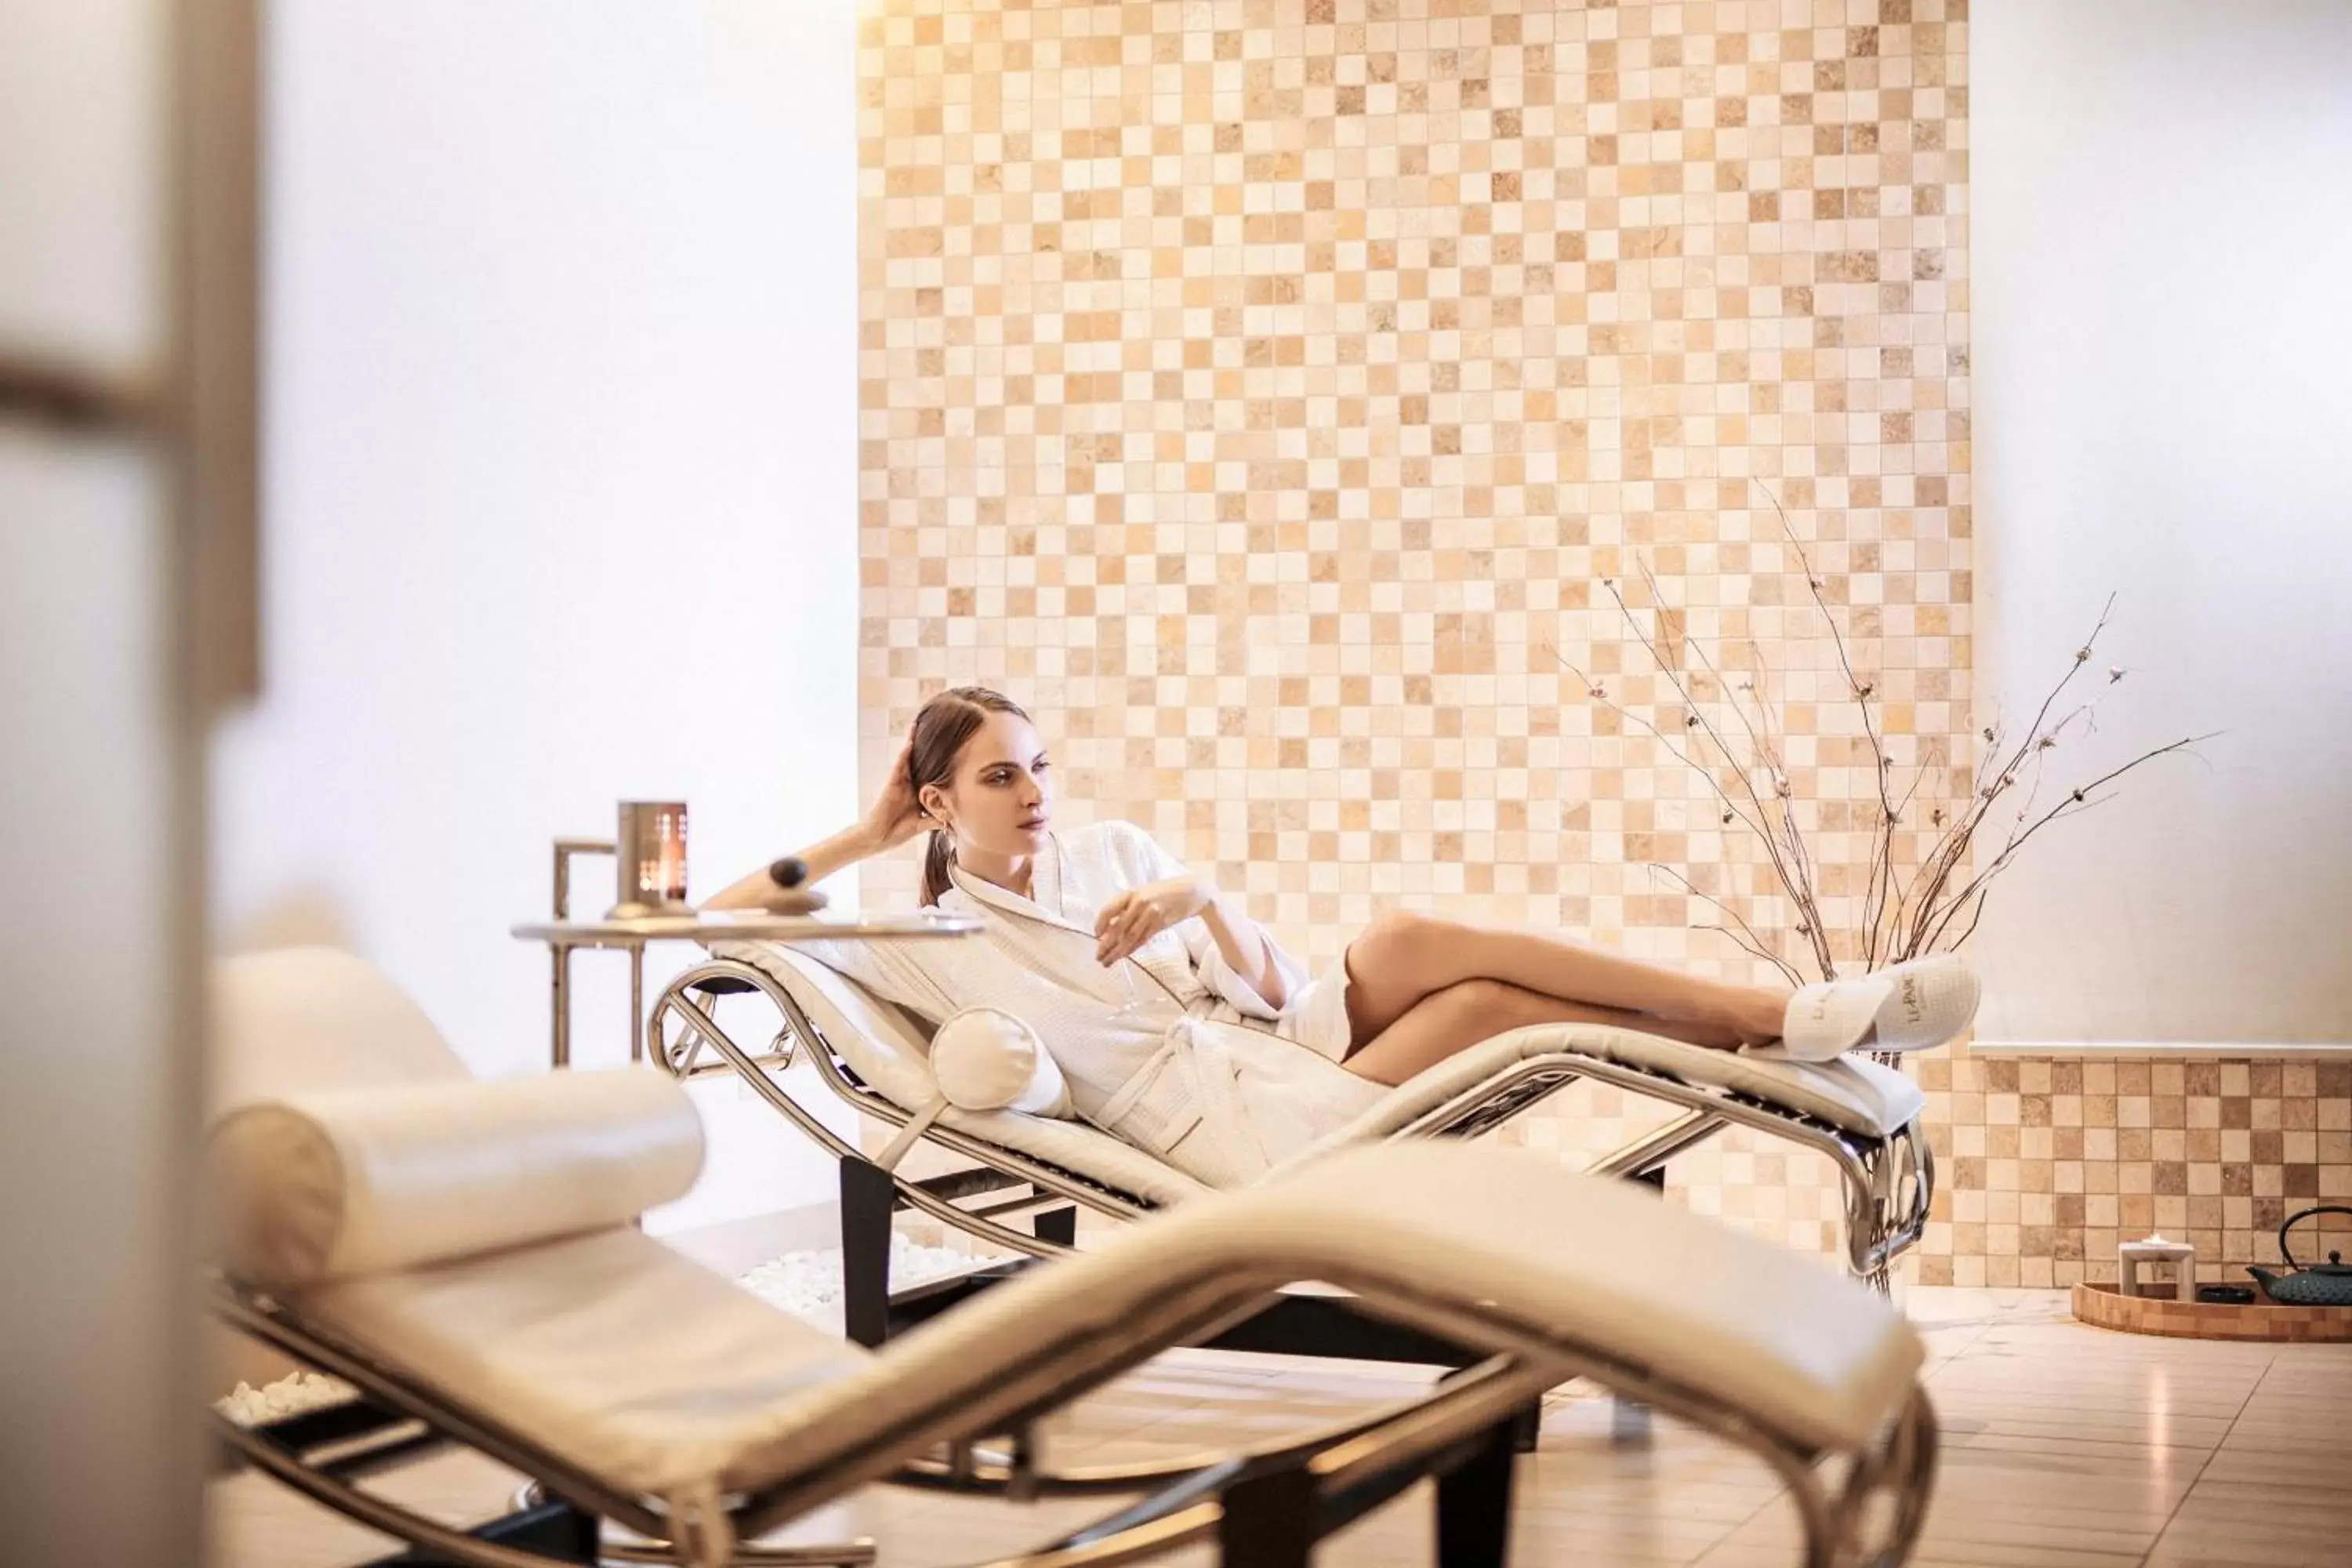 Massage in Le Parc Hotel, Beyond Stars